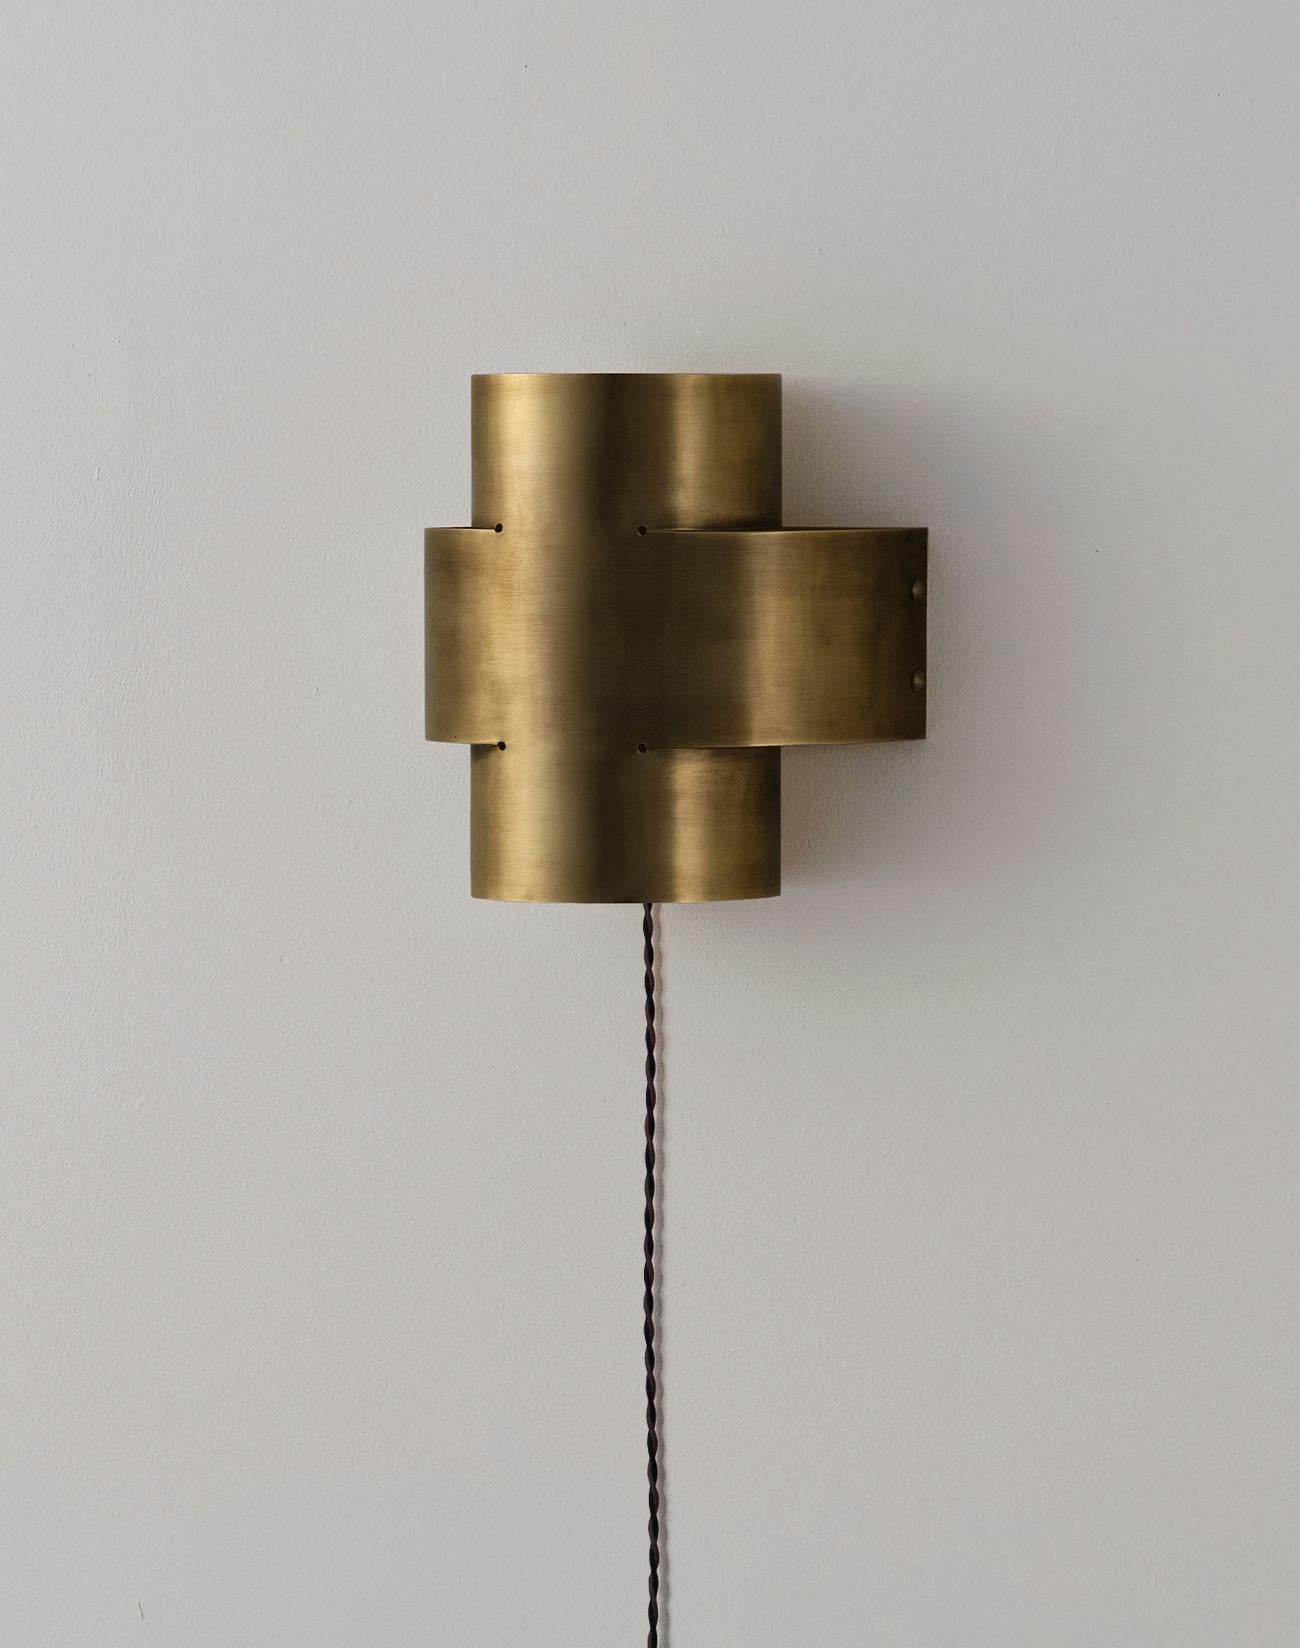 Aged brass plus one large lamp by Paul Matter
Dimensions: L: 240 mm, H: 254 mm, D: 155 mm
1 Type E27 Base, 3W - 5W LED
Warm White, Voltage 220-240V
CE Certified
Dimmable upon request
Materials: Brass

Finished in burnt, aged, buffed brass